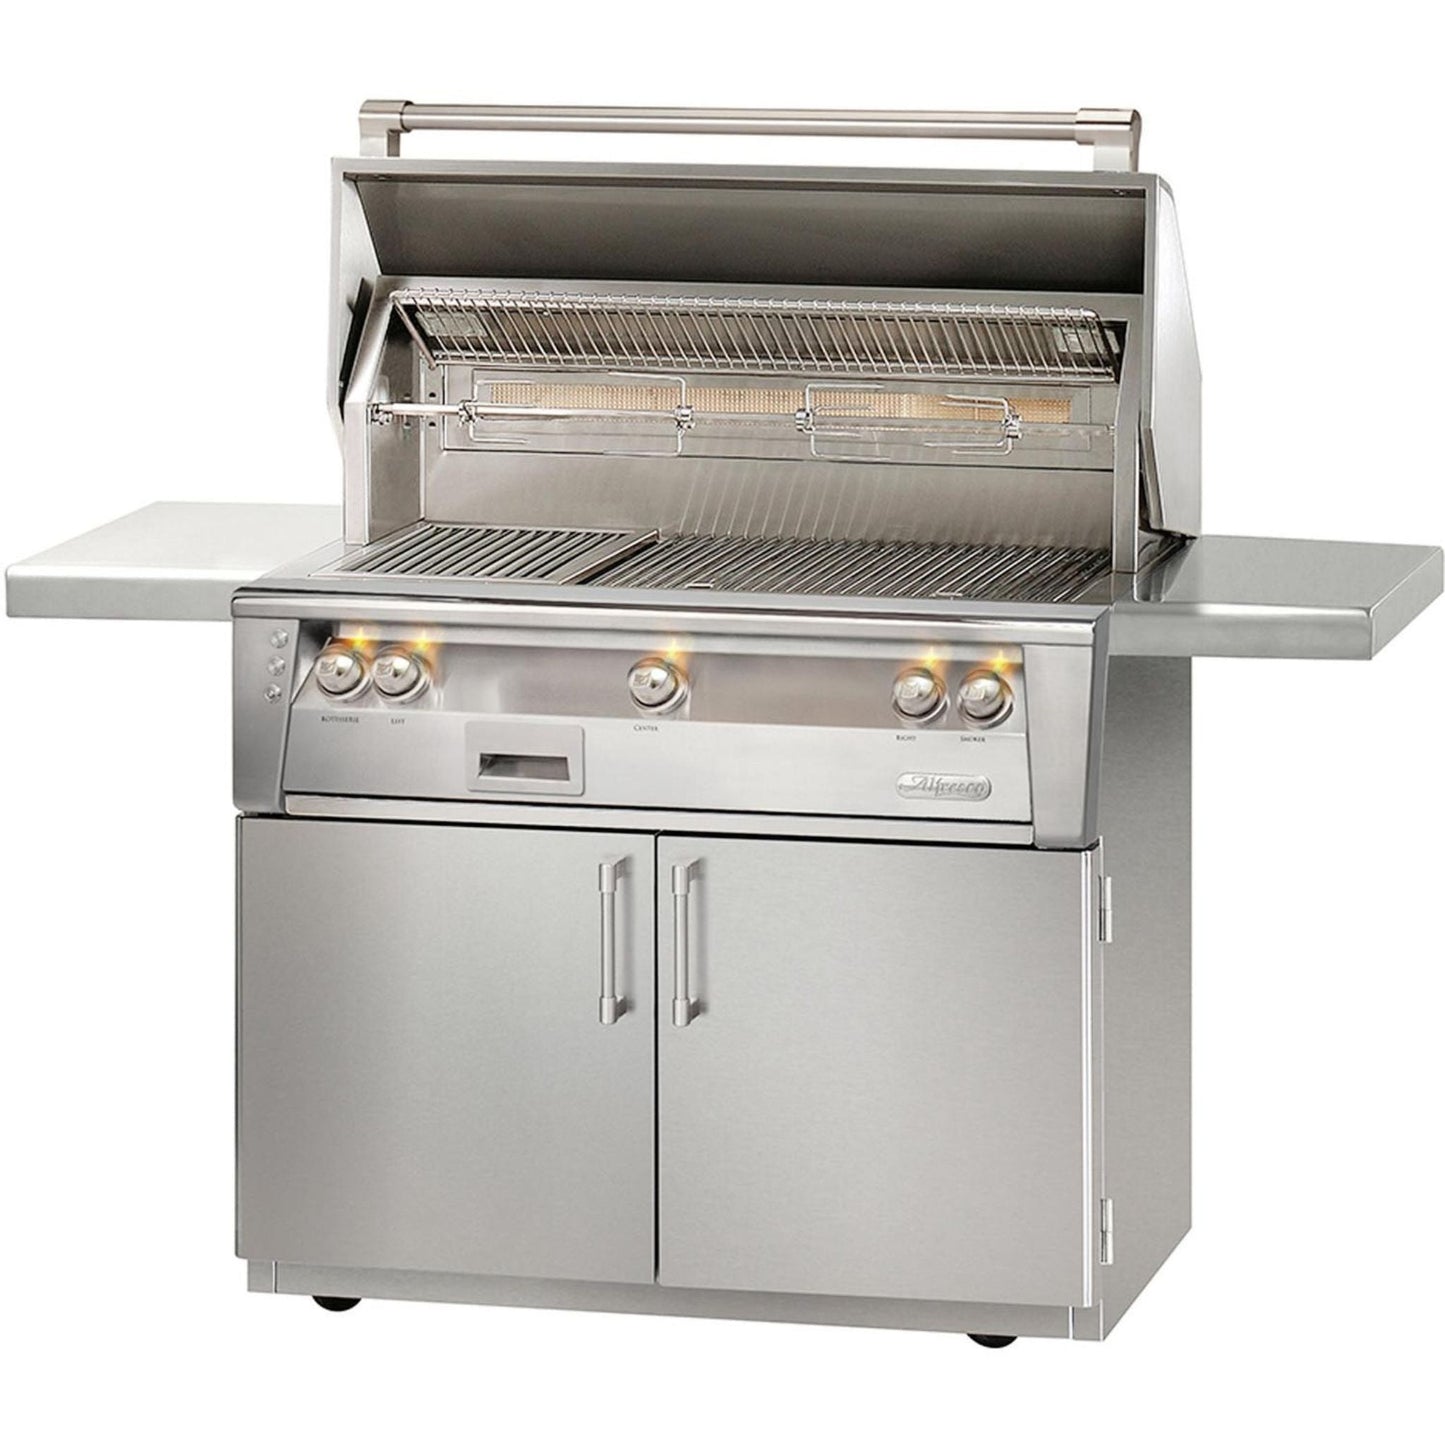 Alfresco Luxury 42" Stainless Steel Standard Natural Gas Grill and Cart - 3 Burner